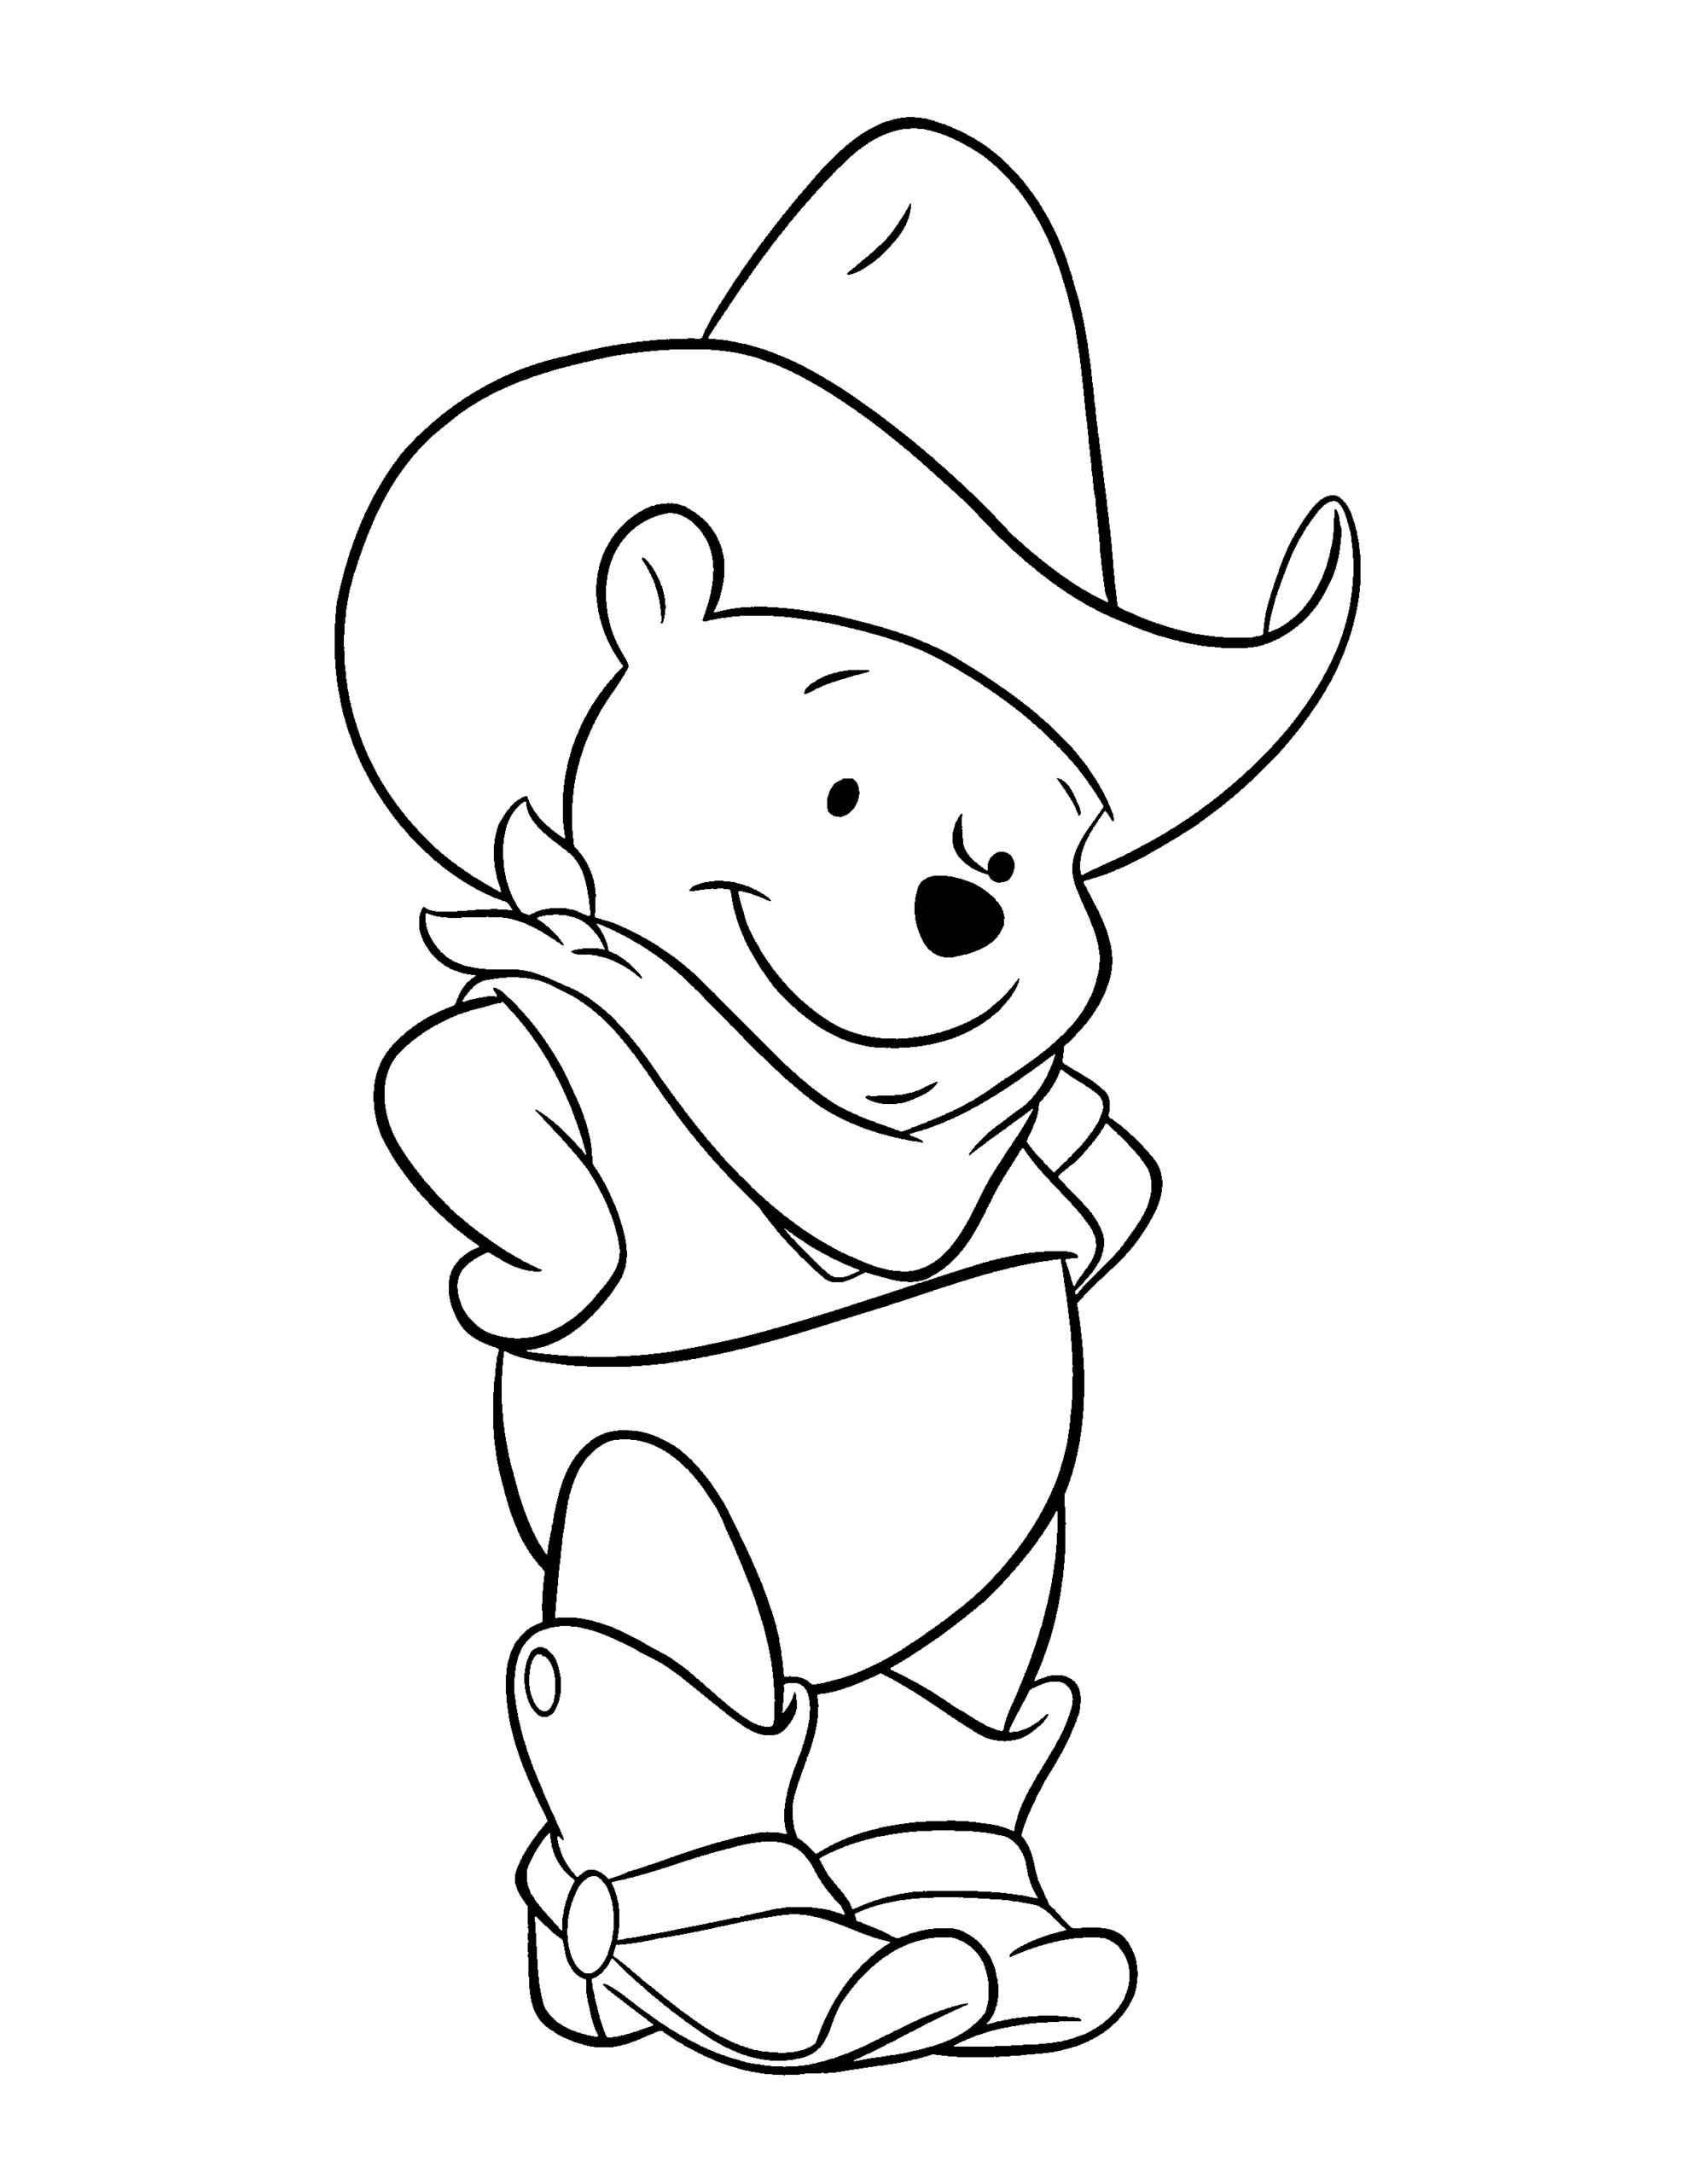 Winnie the Pooh Coloring Pages Cartoons winnie the pooh 93 Printable 2020 7216 Coloring4free